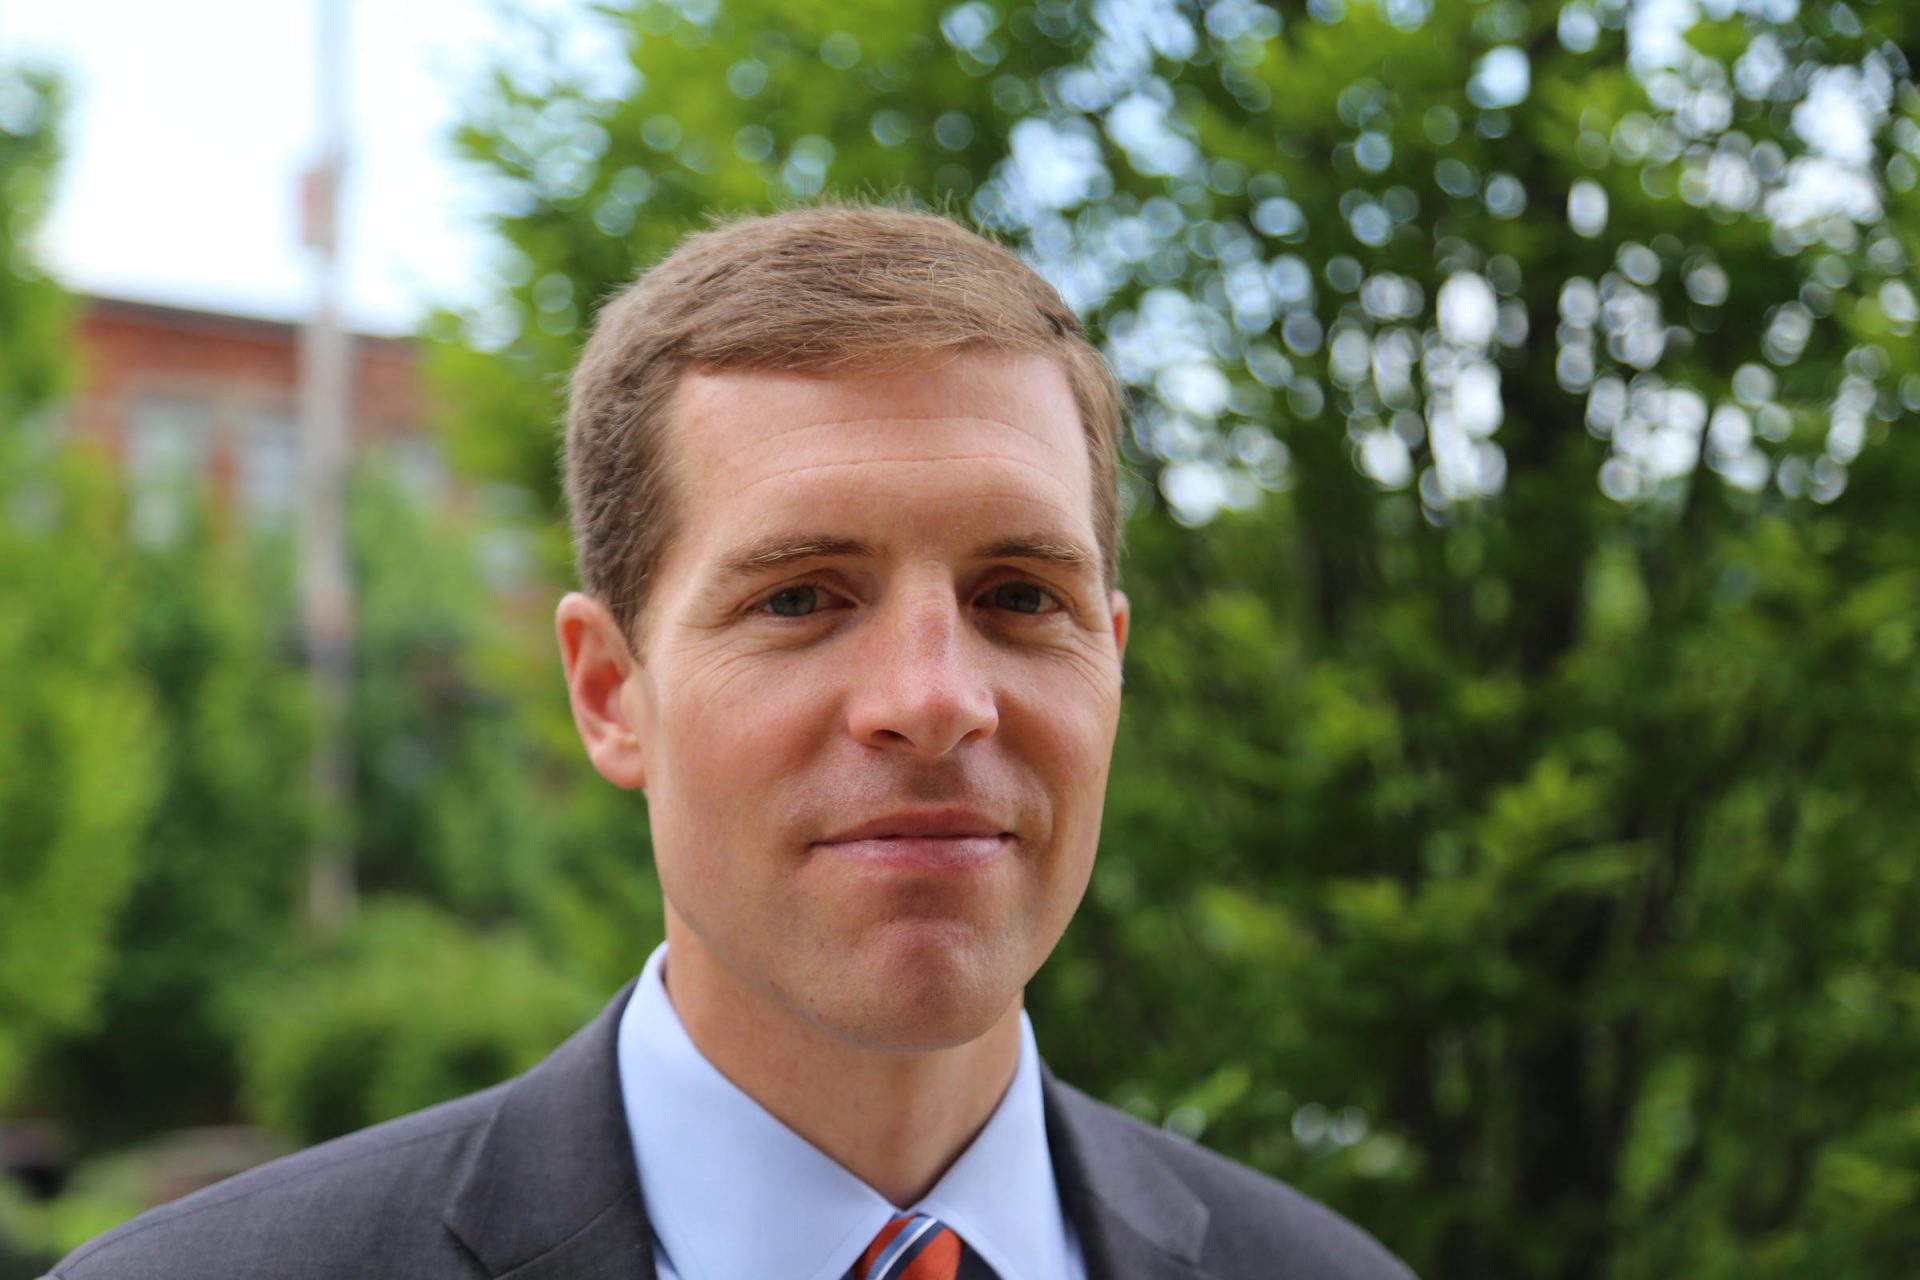 Democrat Conor Lamb represents Allegheny County suburbs and all of Beaver County in the U.S. House of Representatives.